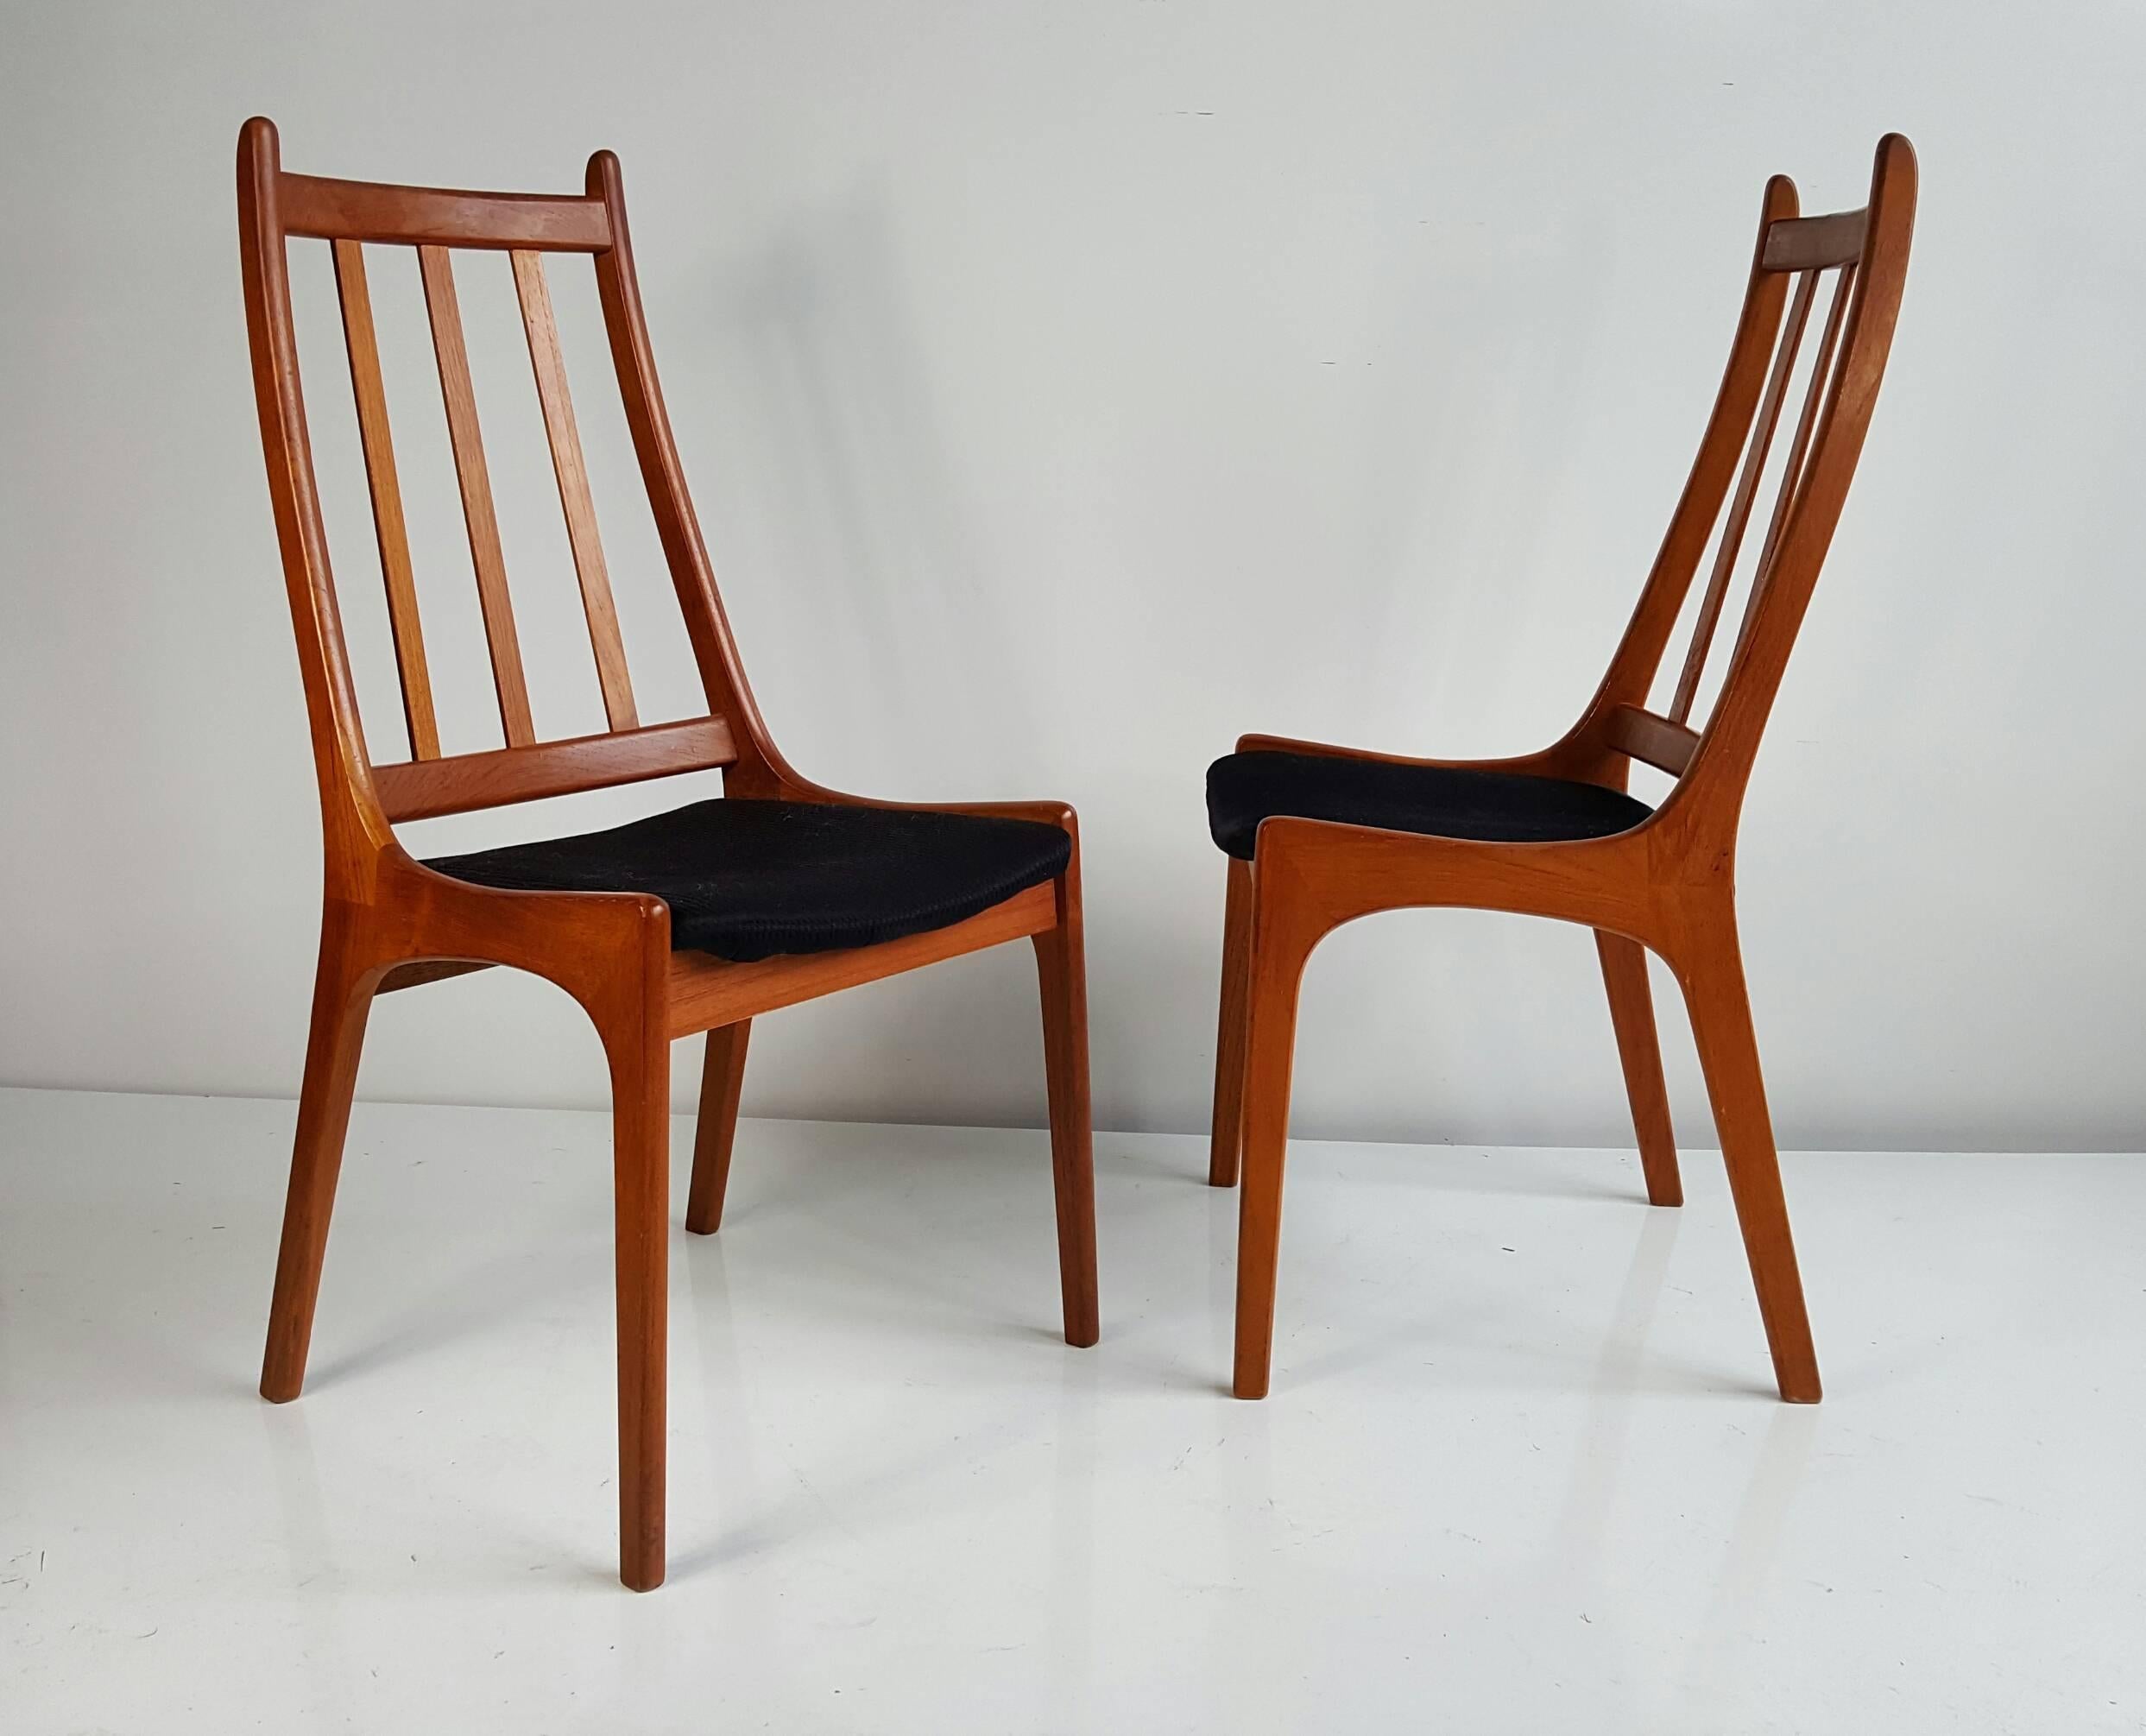 Set of six teak dining chairs, made in Denmark, Kai Kristiansen, solid teak construction, extremely comfortable.